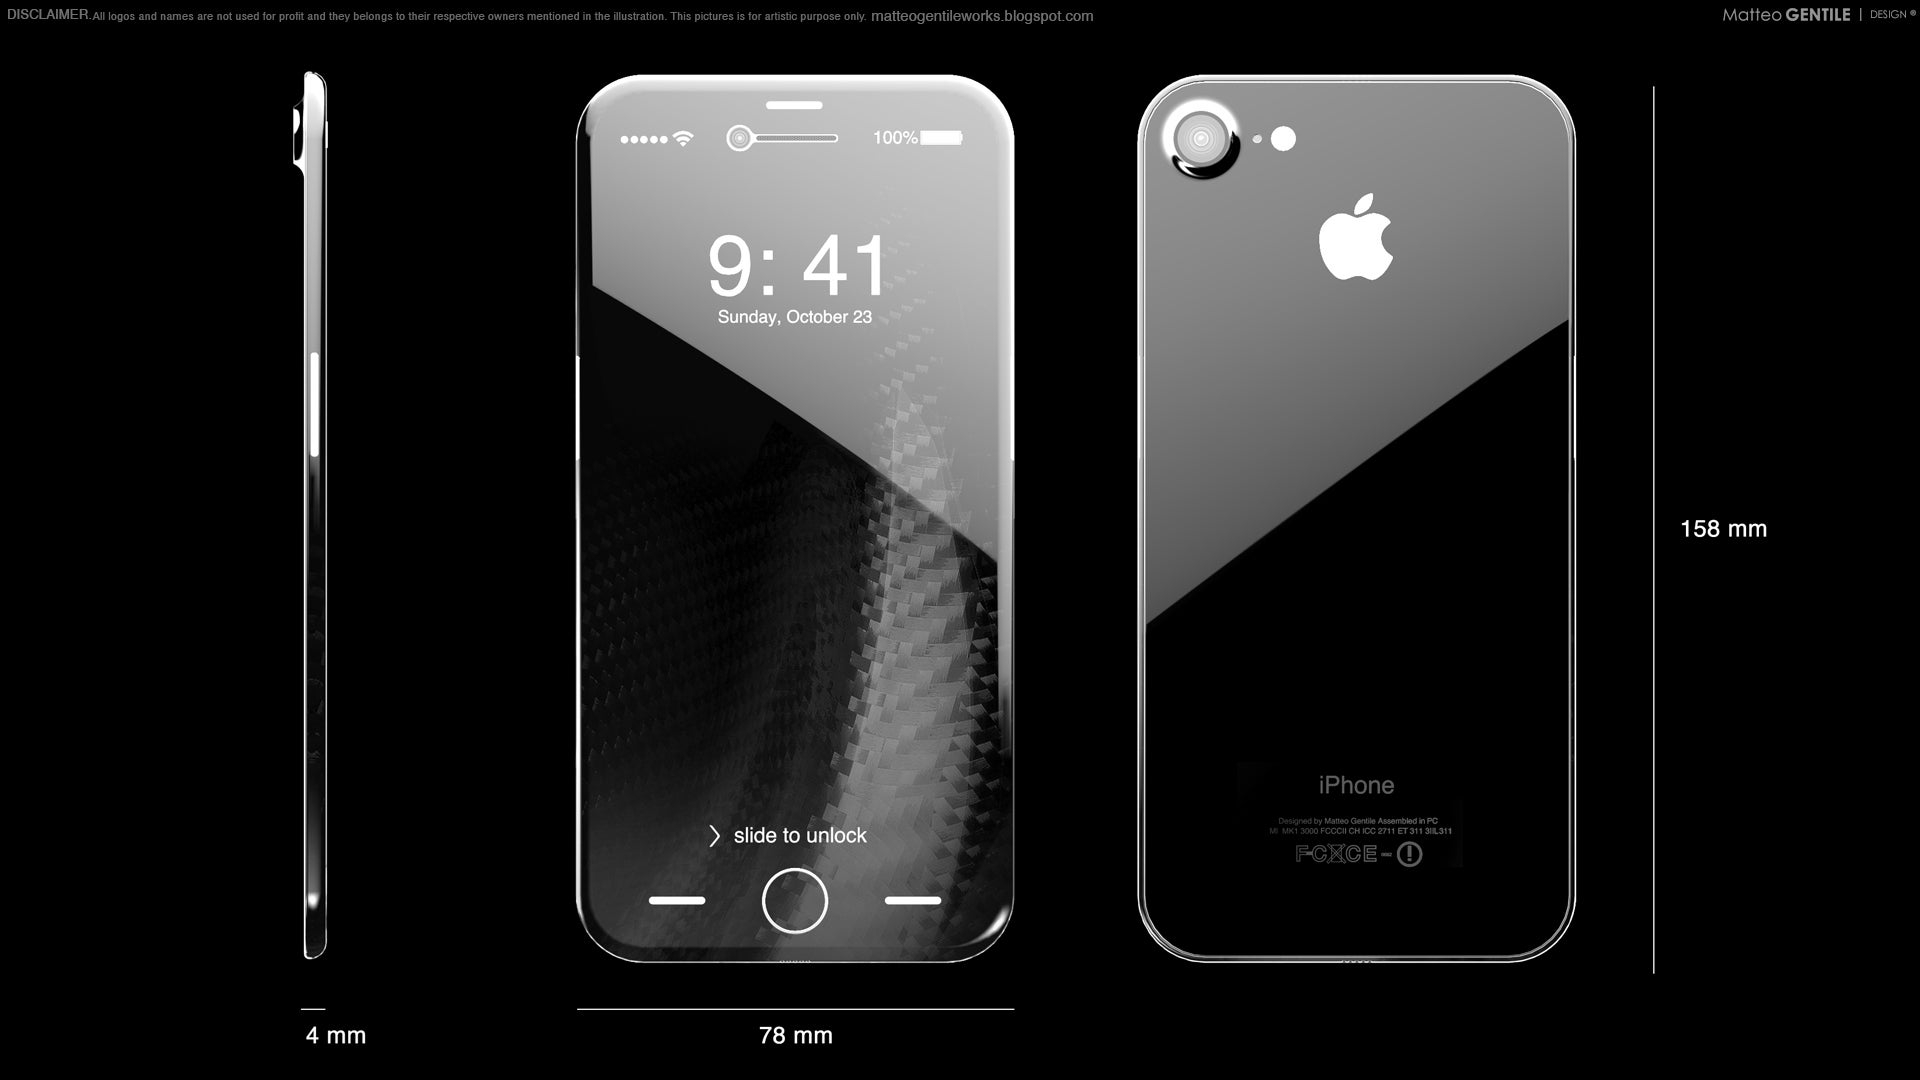 Sloping display, under-glass finger scanner - this OLED iPhone 8 concept fleshes out the rumored redesign - The iPhone 8 and Galaxy S8 may come with 'edge-to-edge' screens, how is that possible?